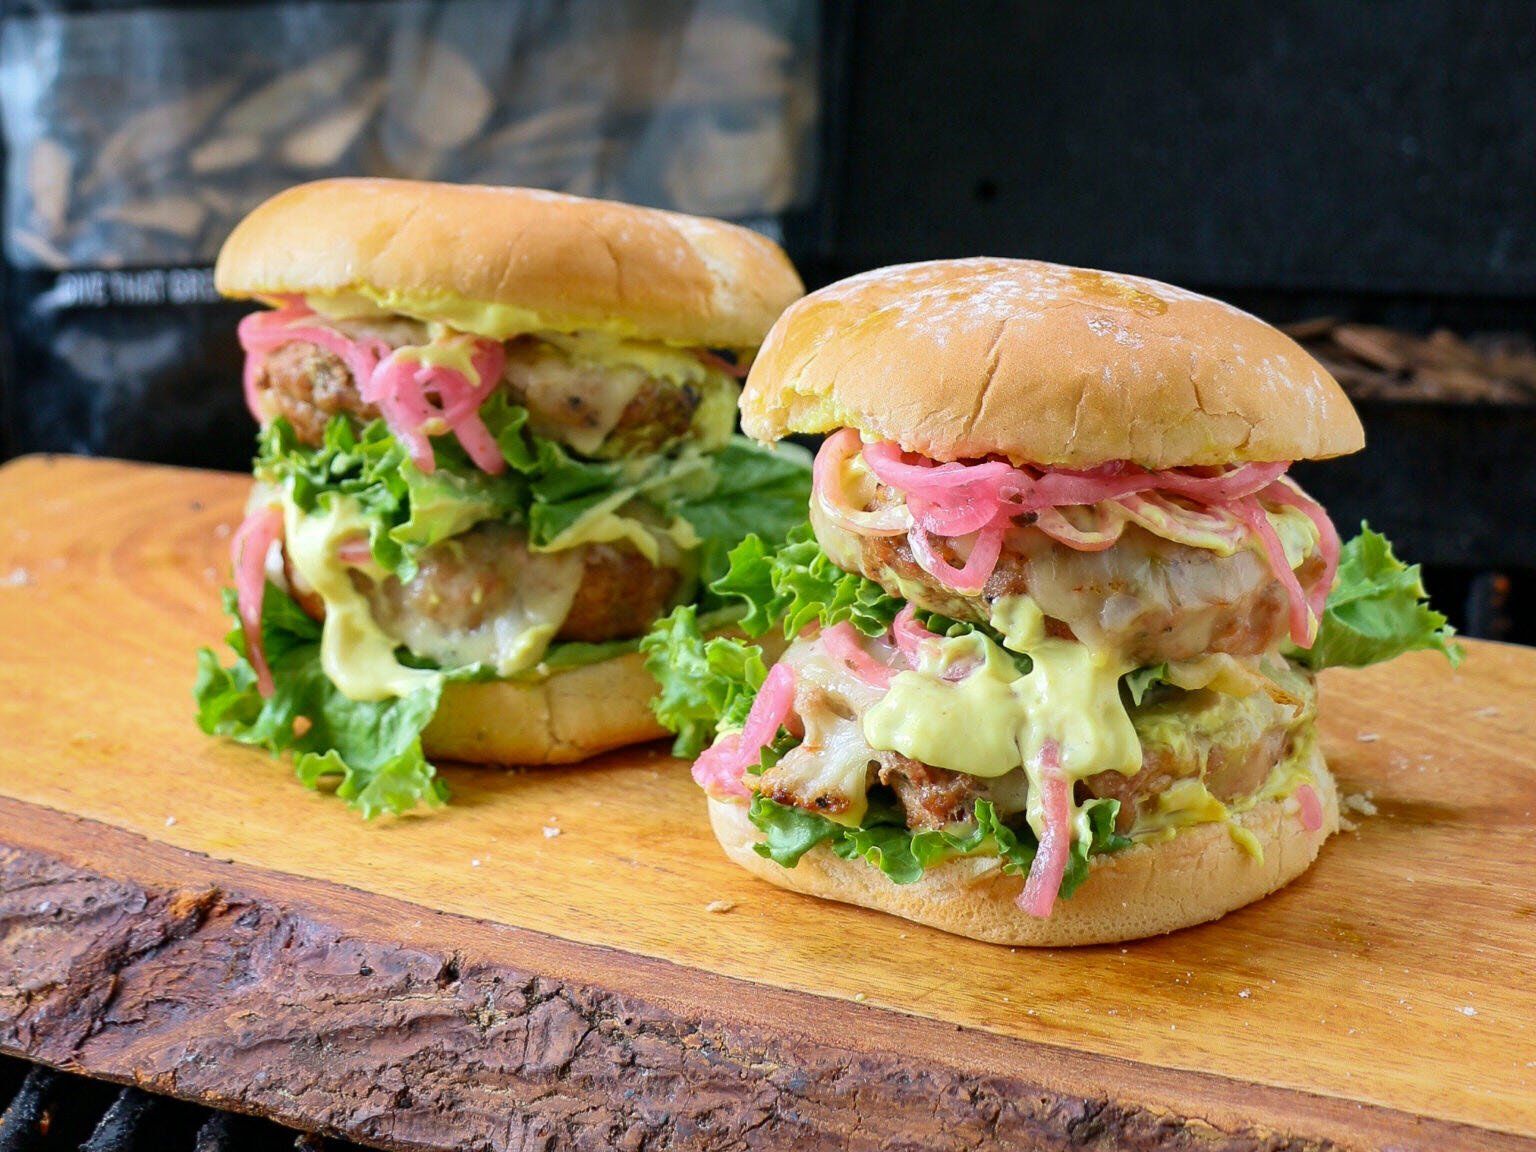 Jack Daniel's® Whiskey Barrel Smoked Pork Burger with pickled onion, lettuce and creamy mustard